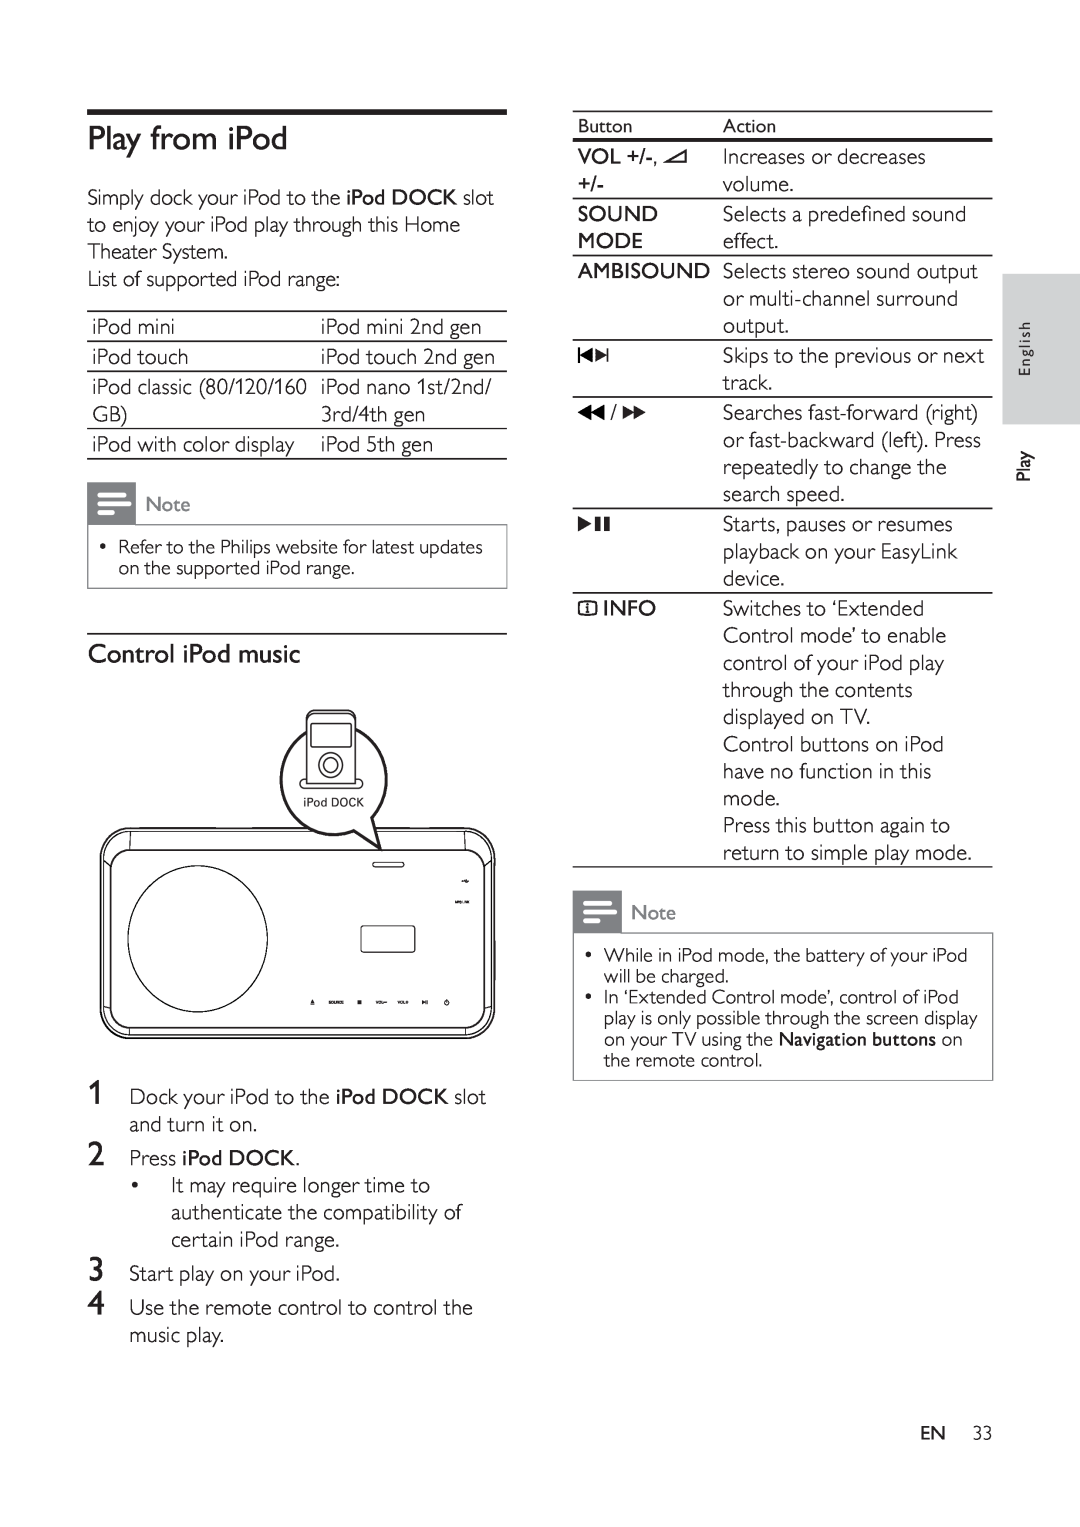 Philips HTS6520/93, 625p, 525p user manual Play from iPod, Control iPod music 